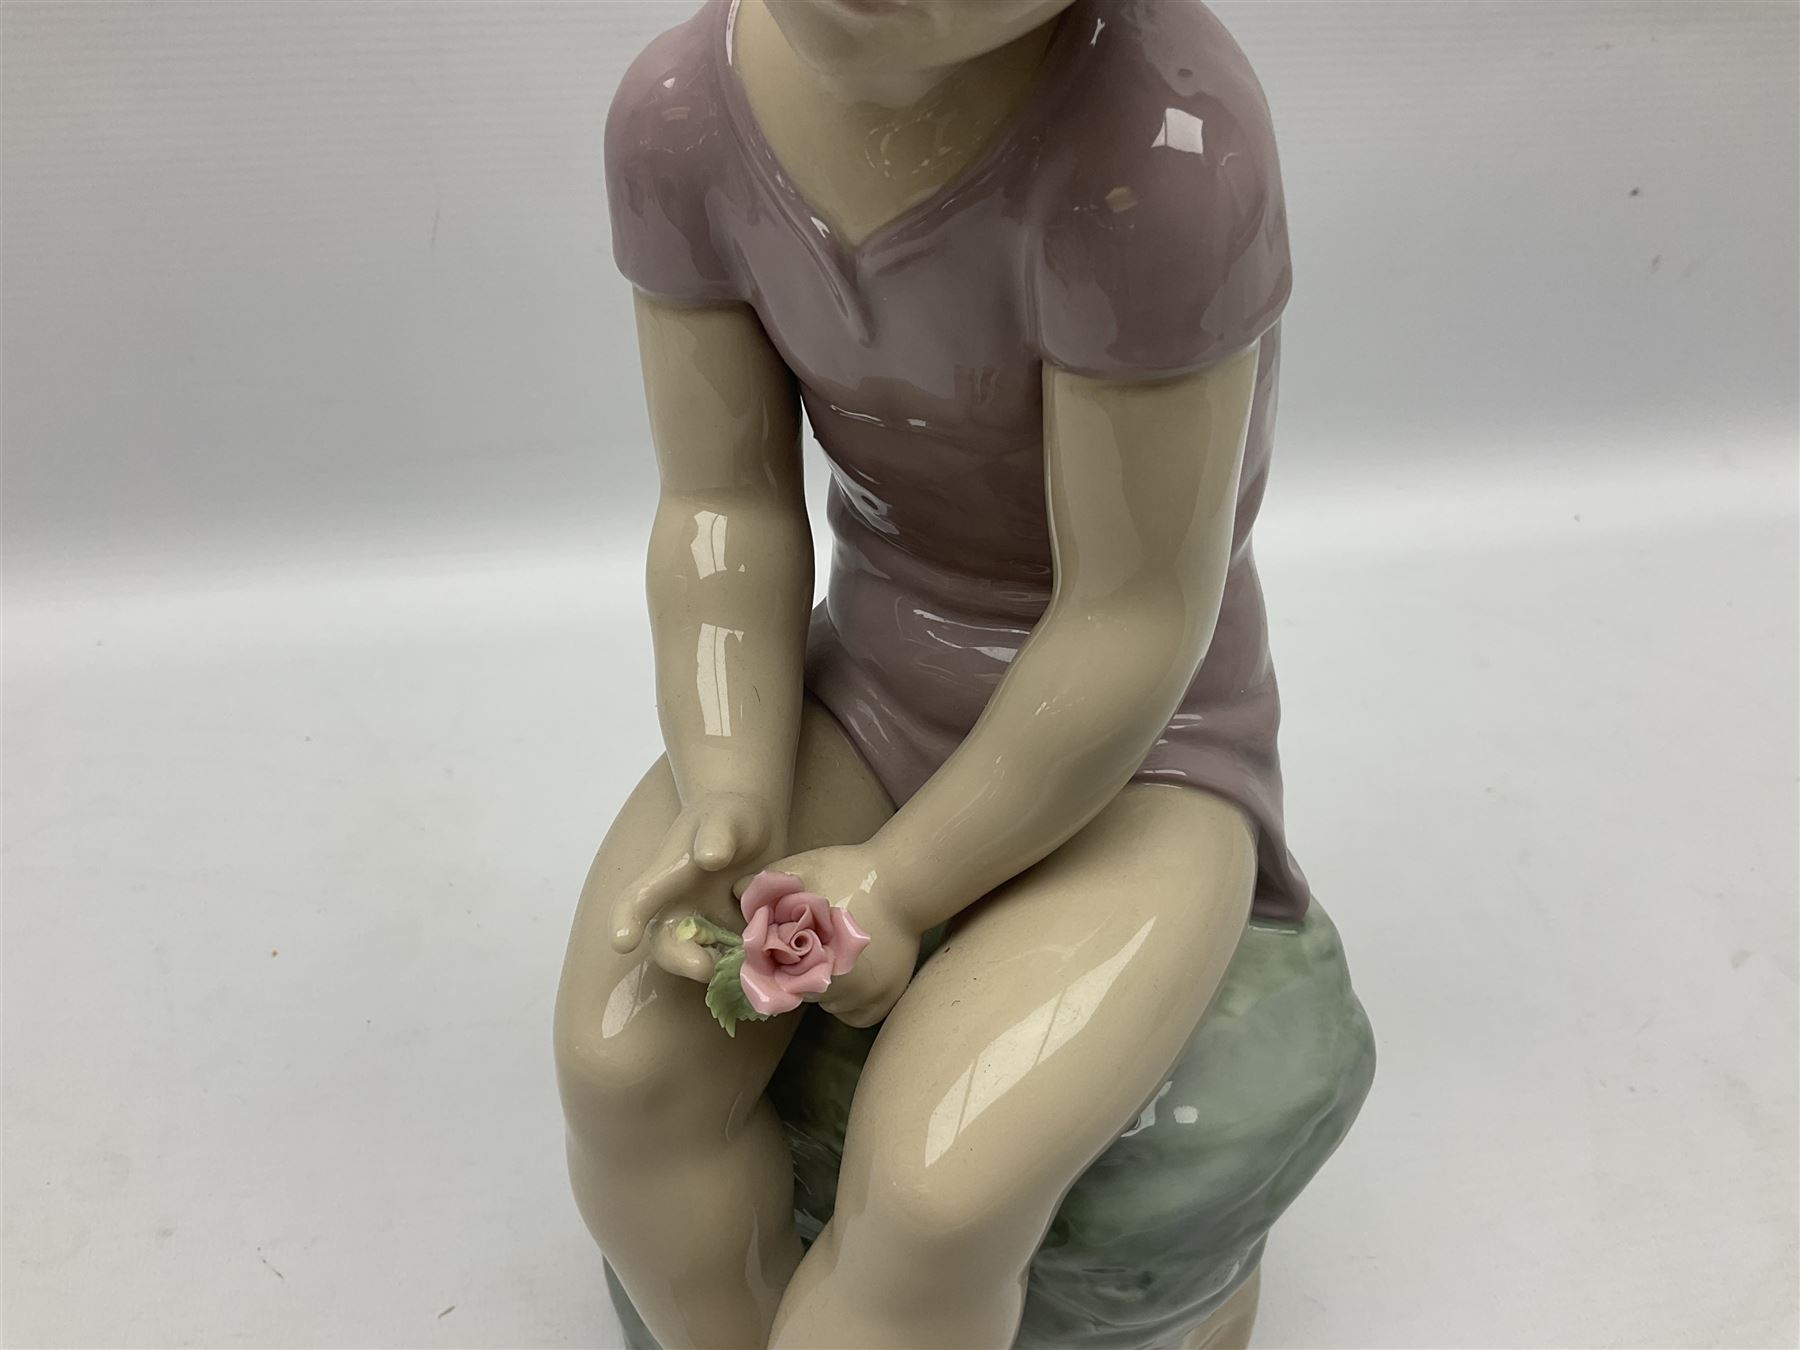 Large Nao figure modelled as a young girl seated upon a rock holding a rose - Image 3 of 6